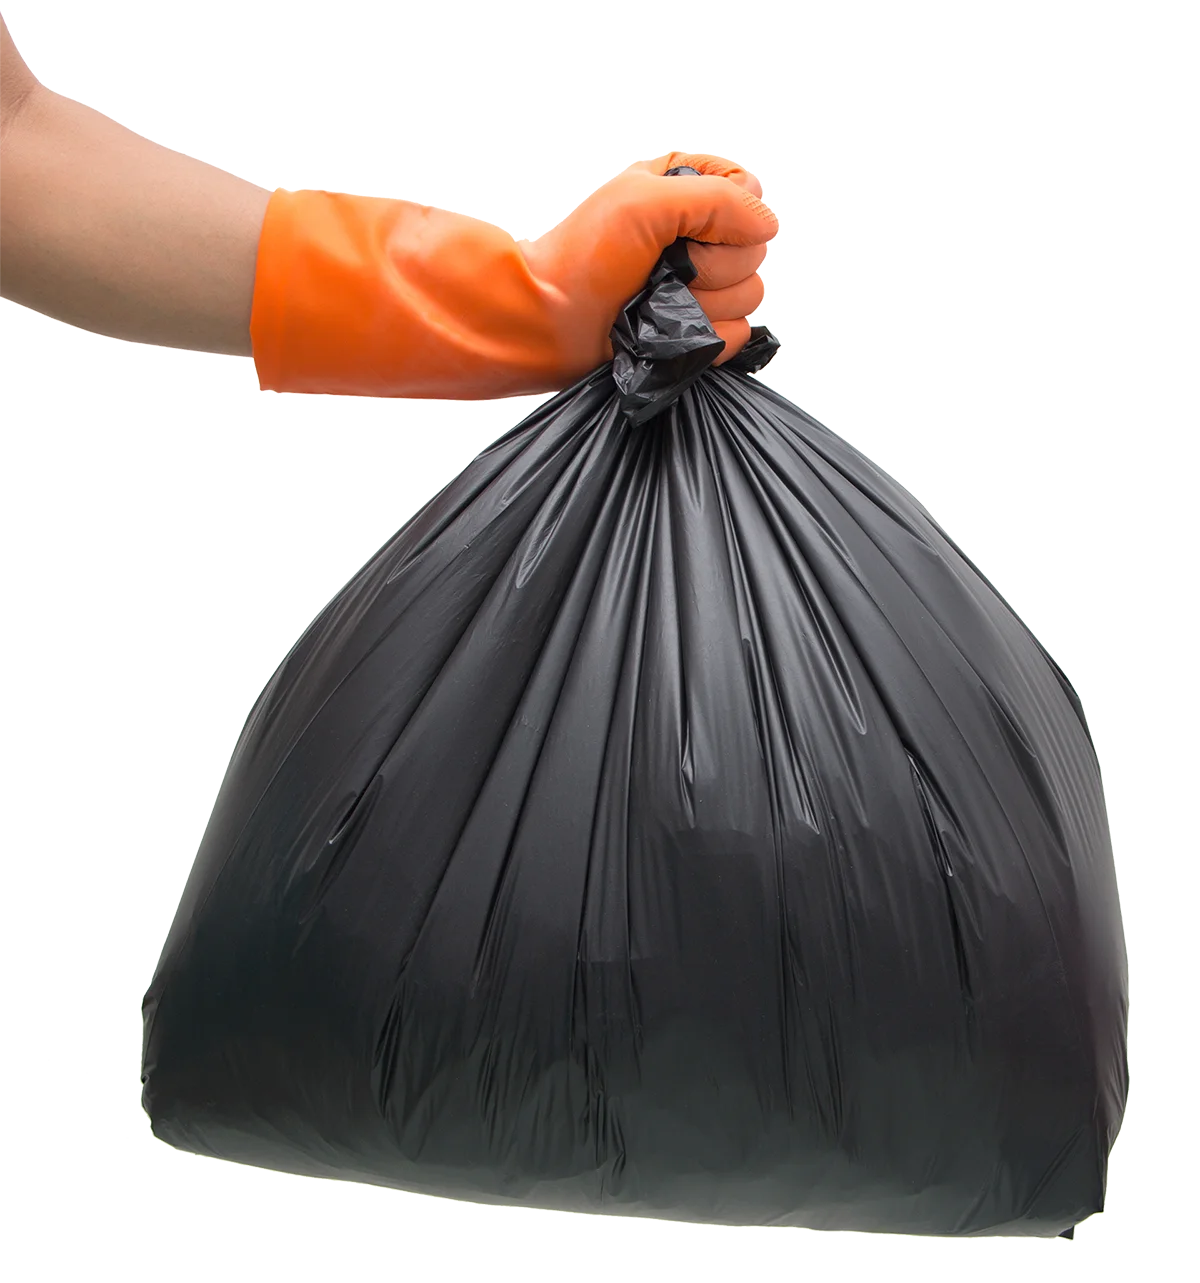 RWS is the apartment trash pickup company near you that you can count on for expert doorstep trash services.